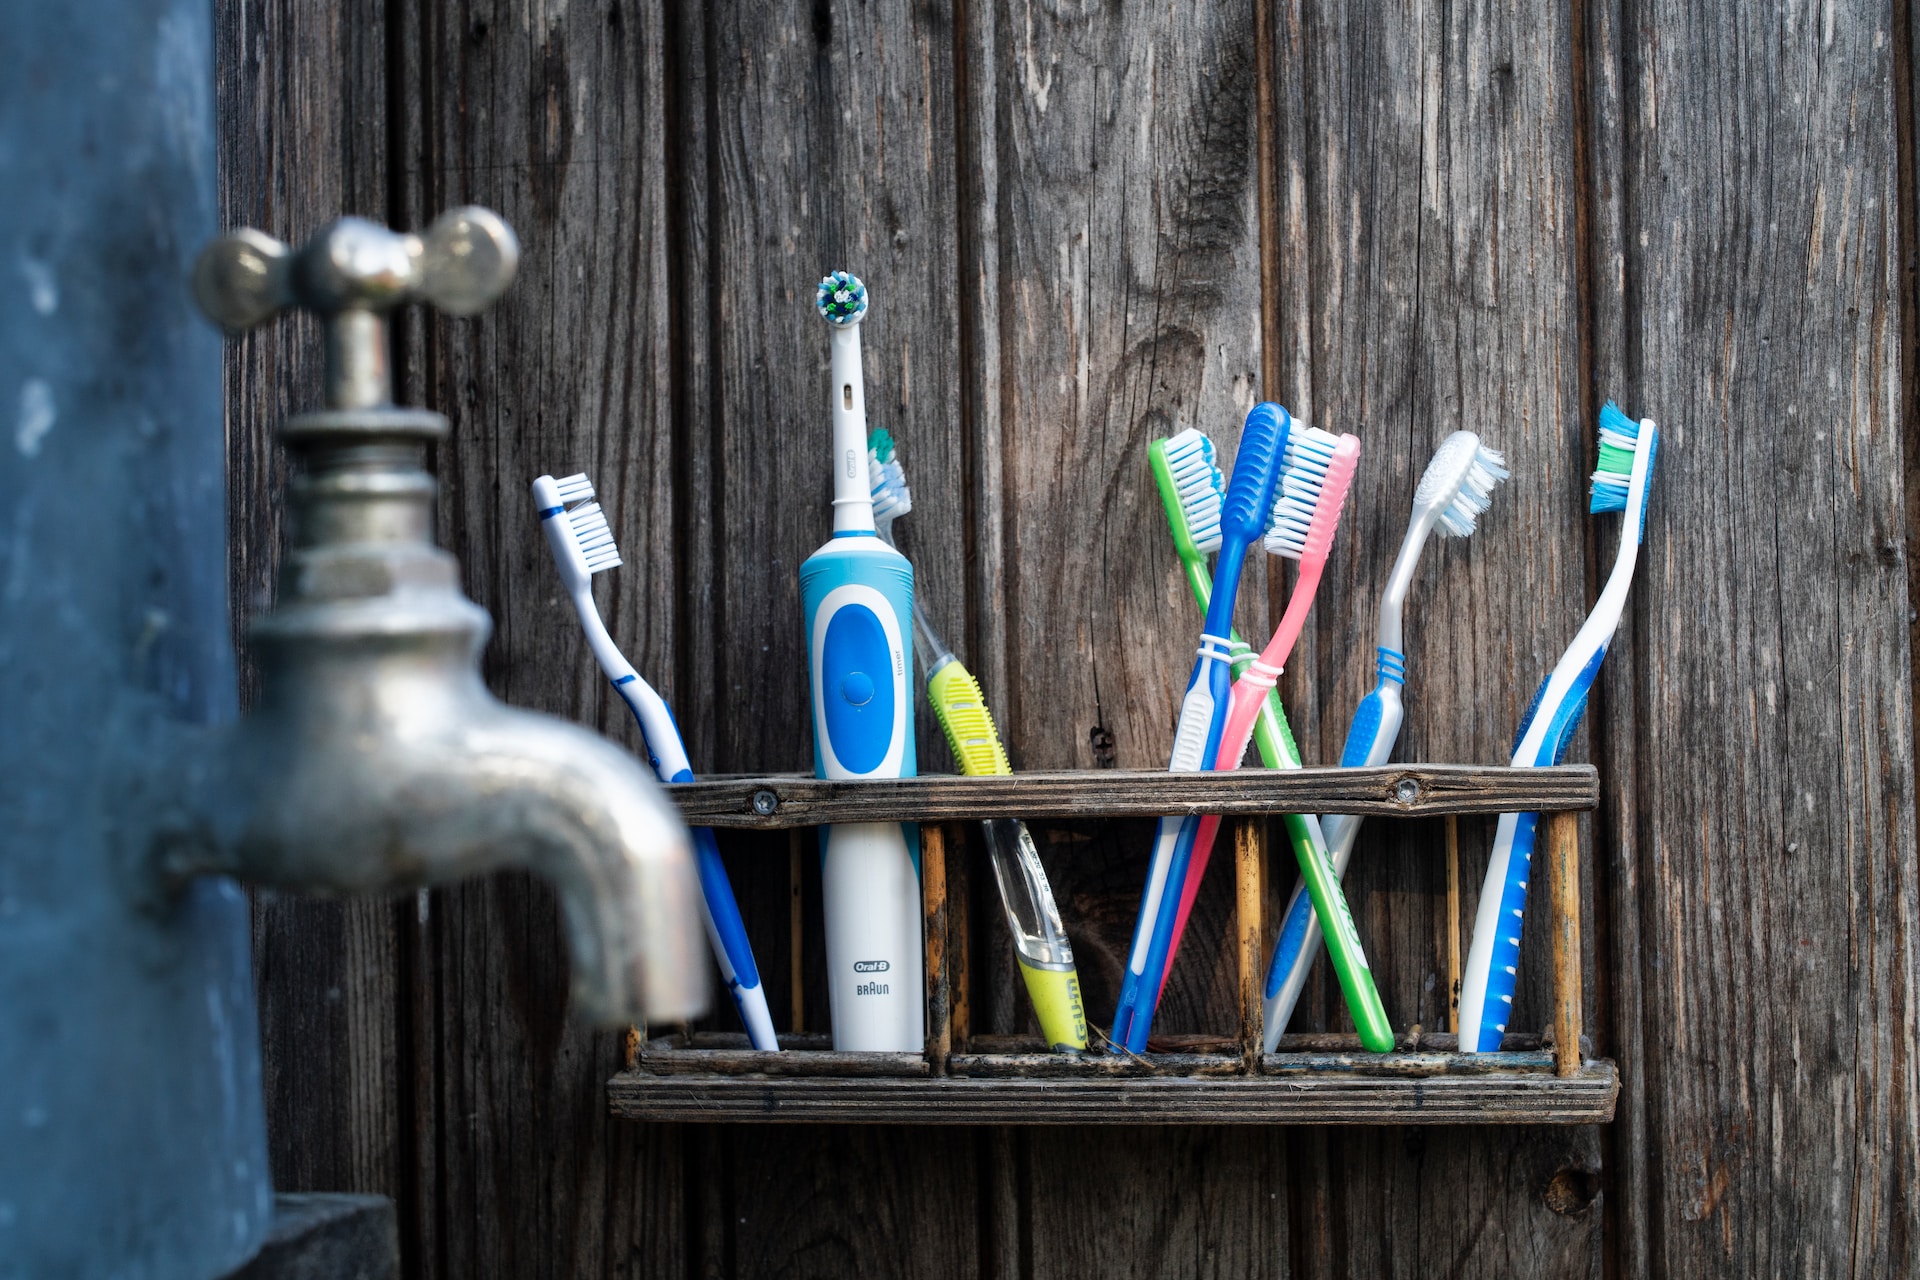 many kinds of toothbrushes on a shelf -finding the right toothbrush